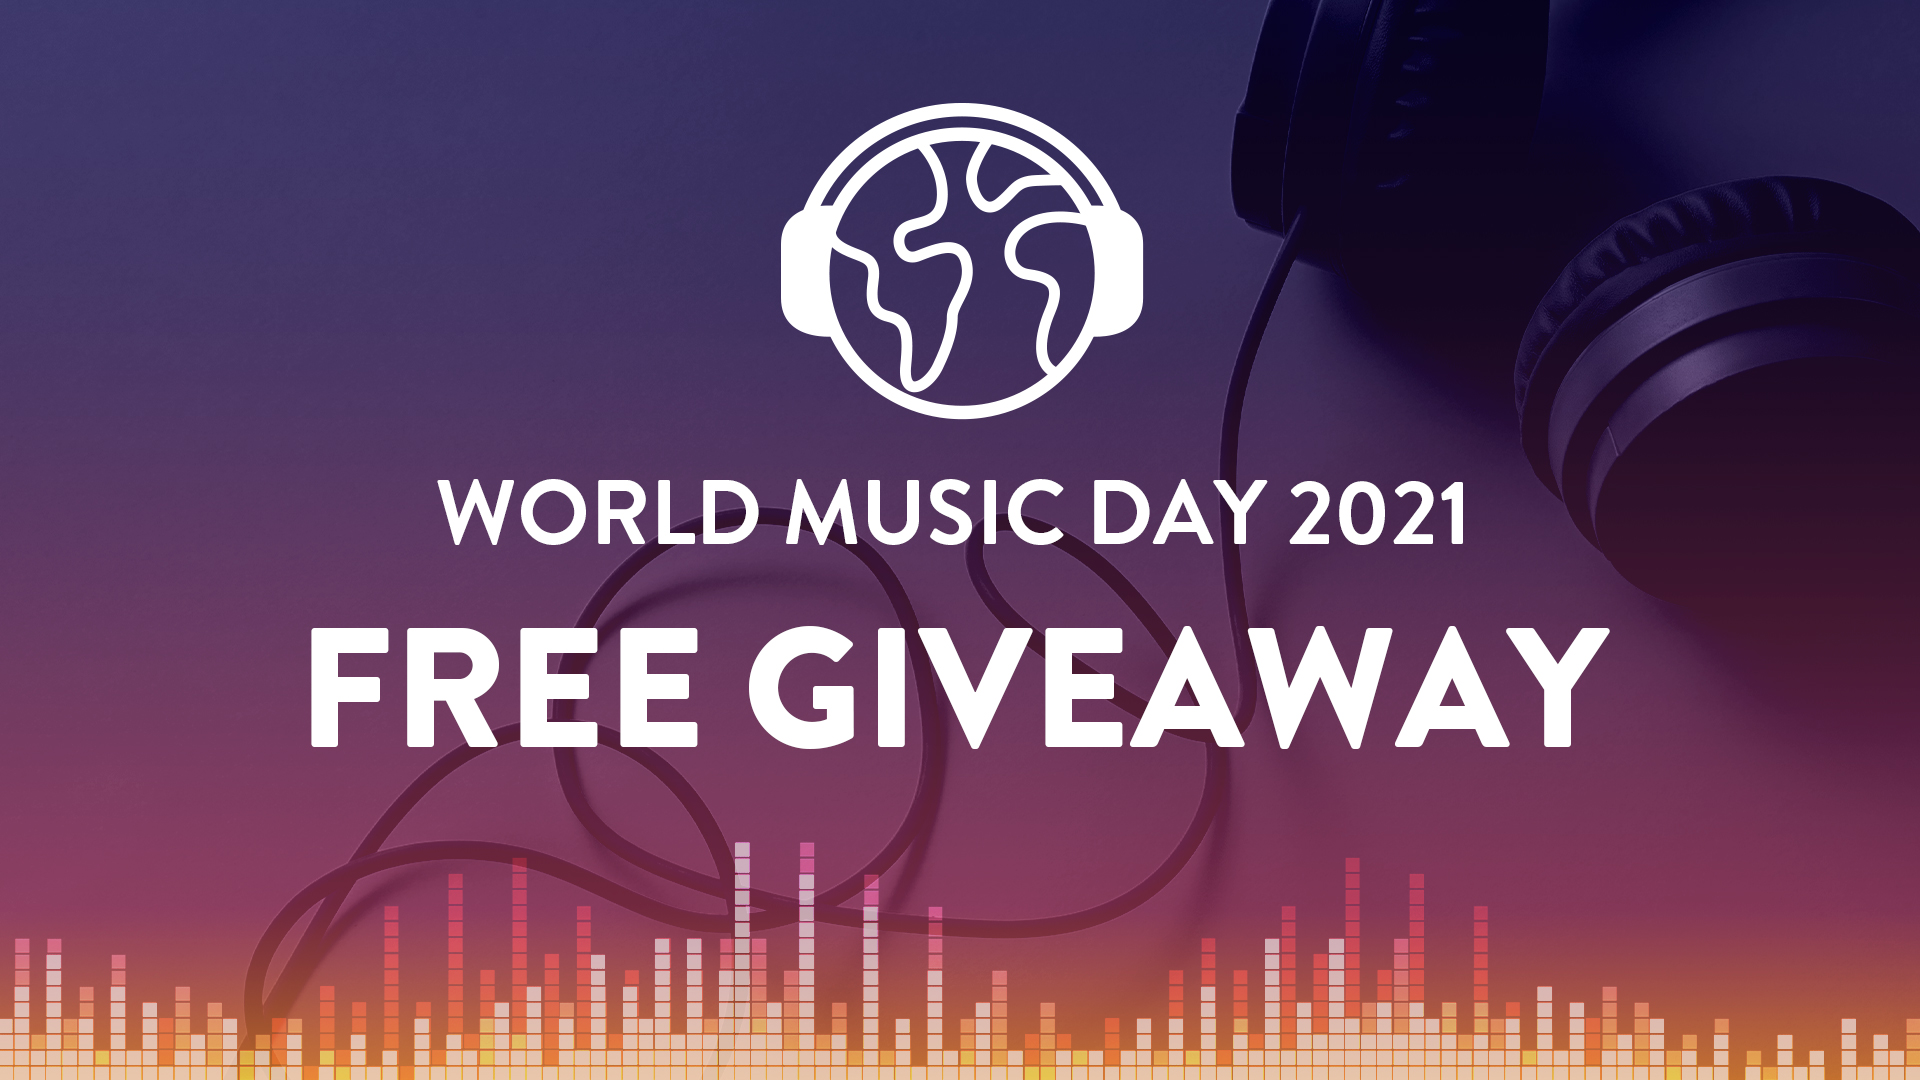 World Music Day Free Giveaway